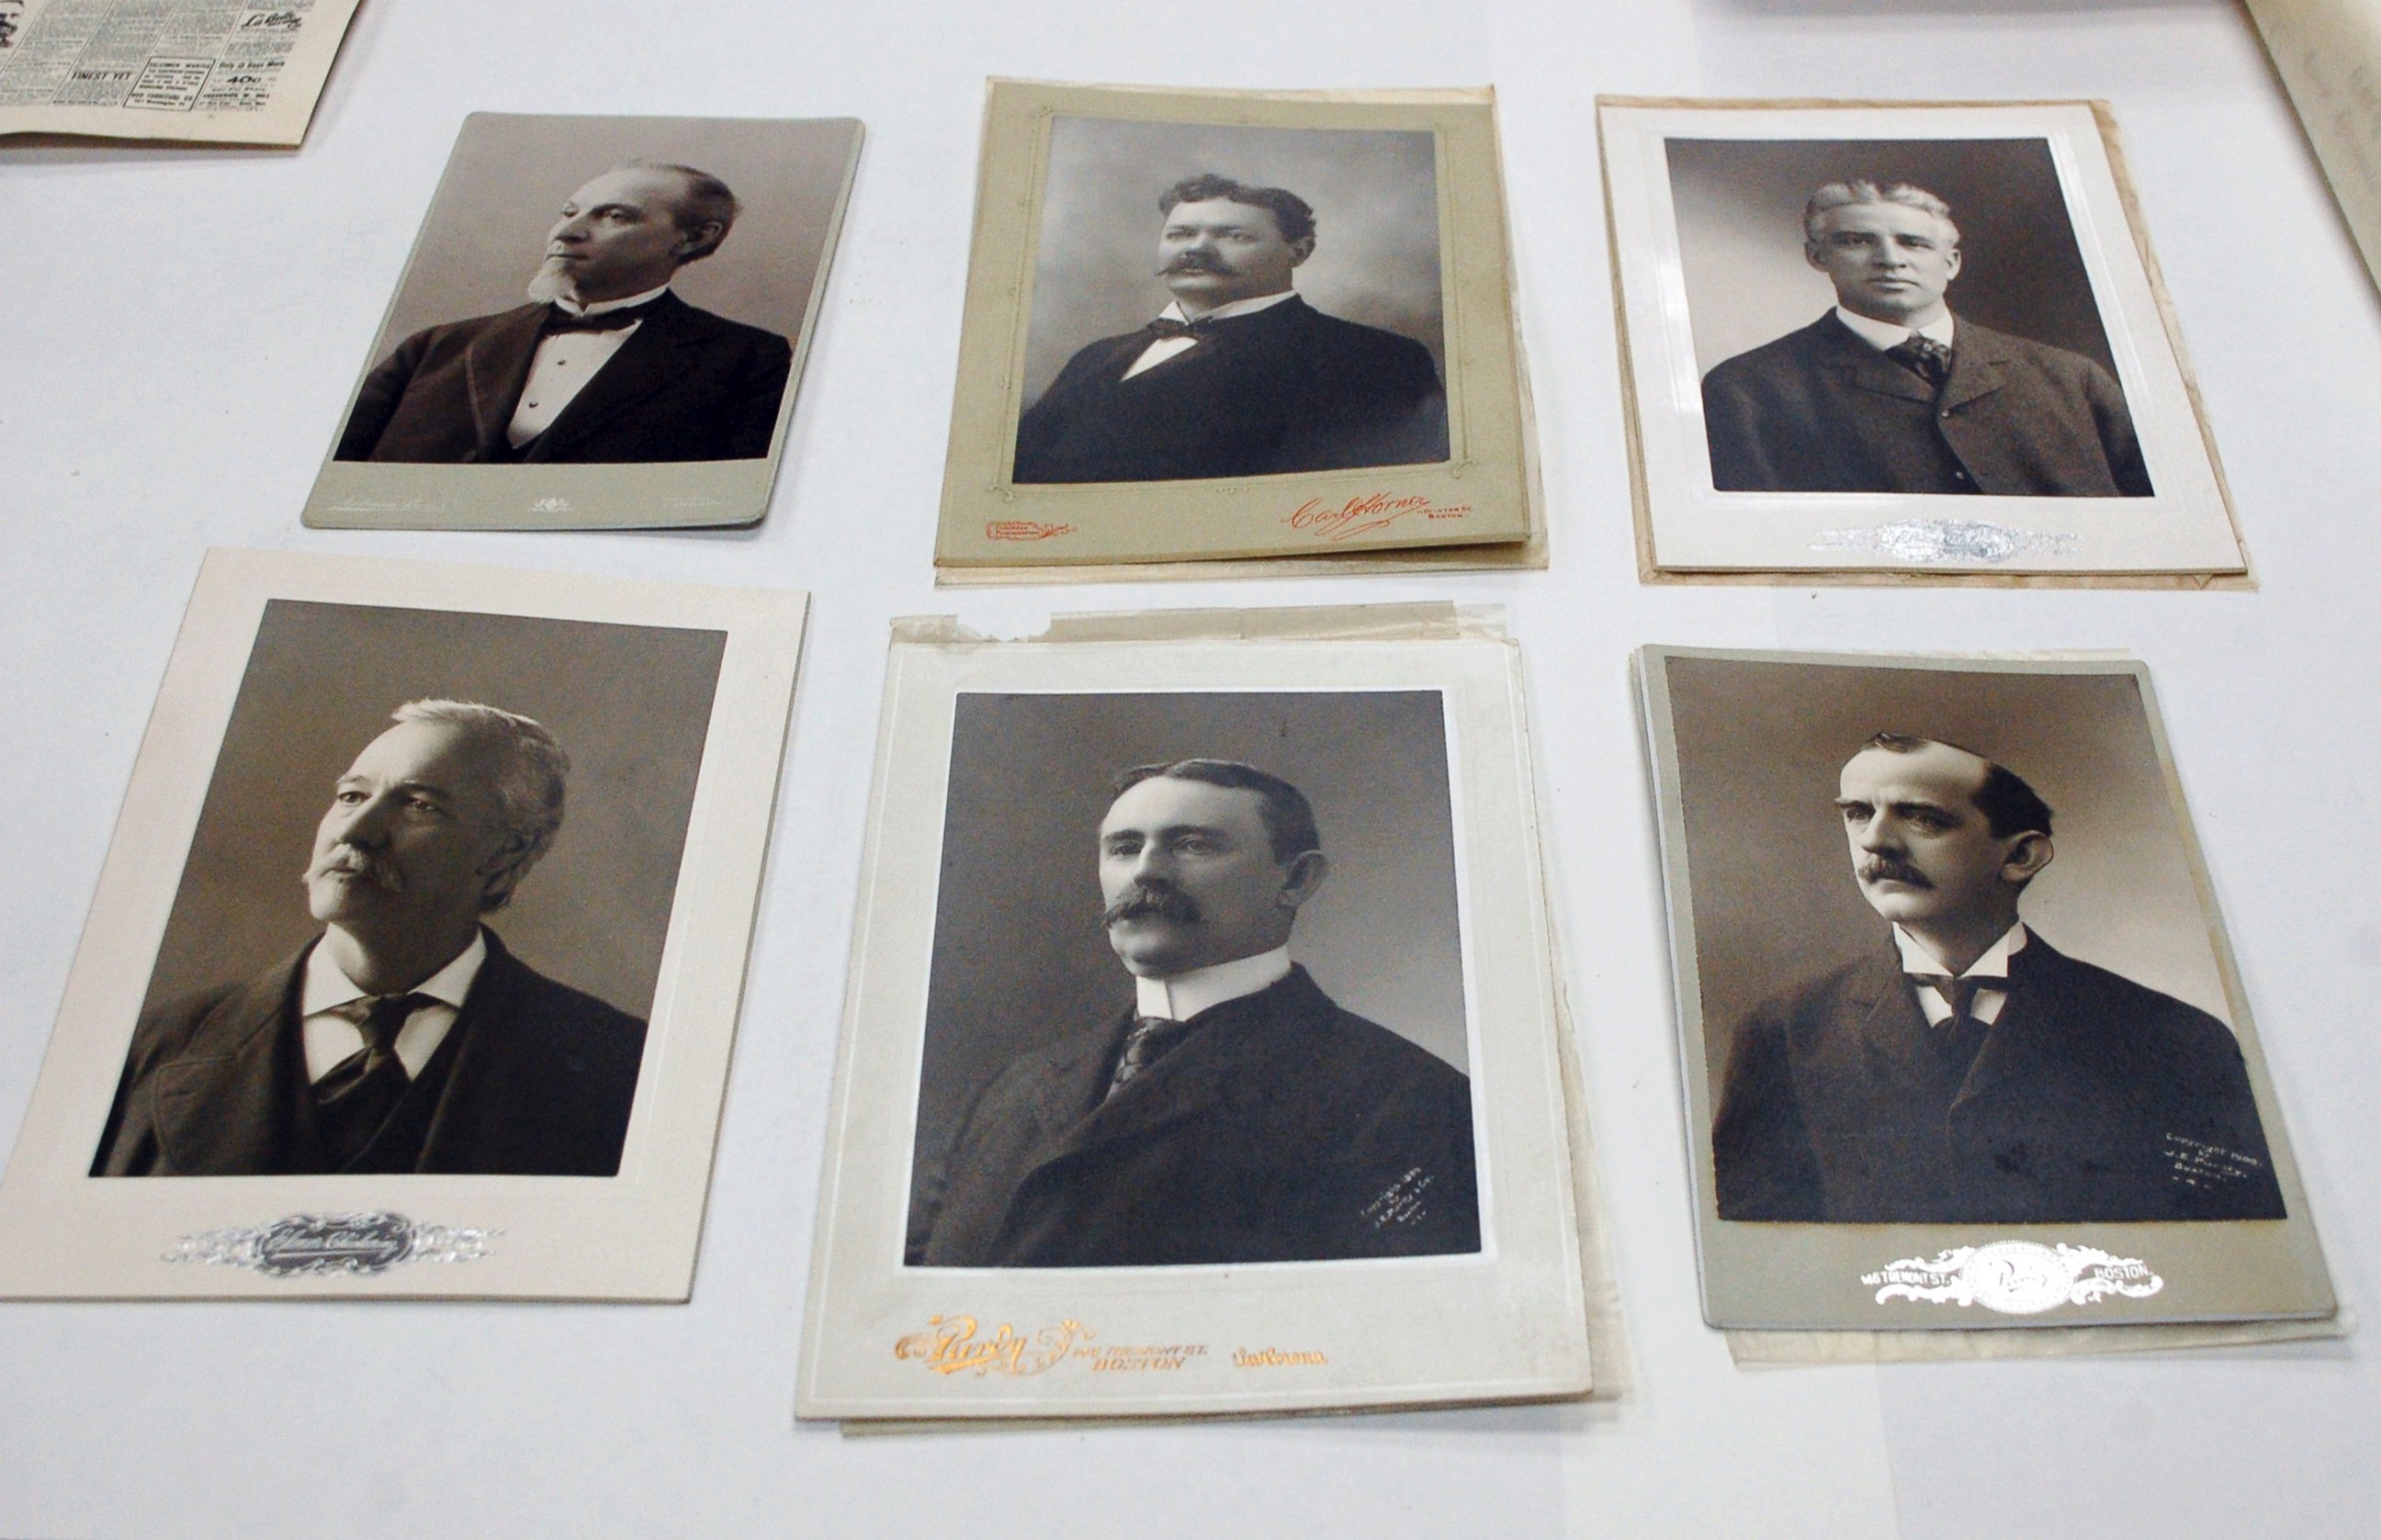 PHOTO: Photographs of city and state elected officials, including Boston Mayor Thomas Norton Hart at top left, are displayed after they were taken from a 1901 time capsule in Boston.